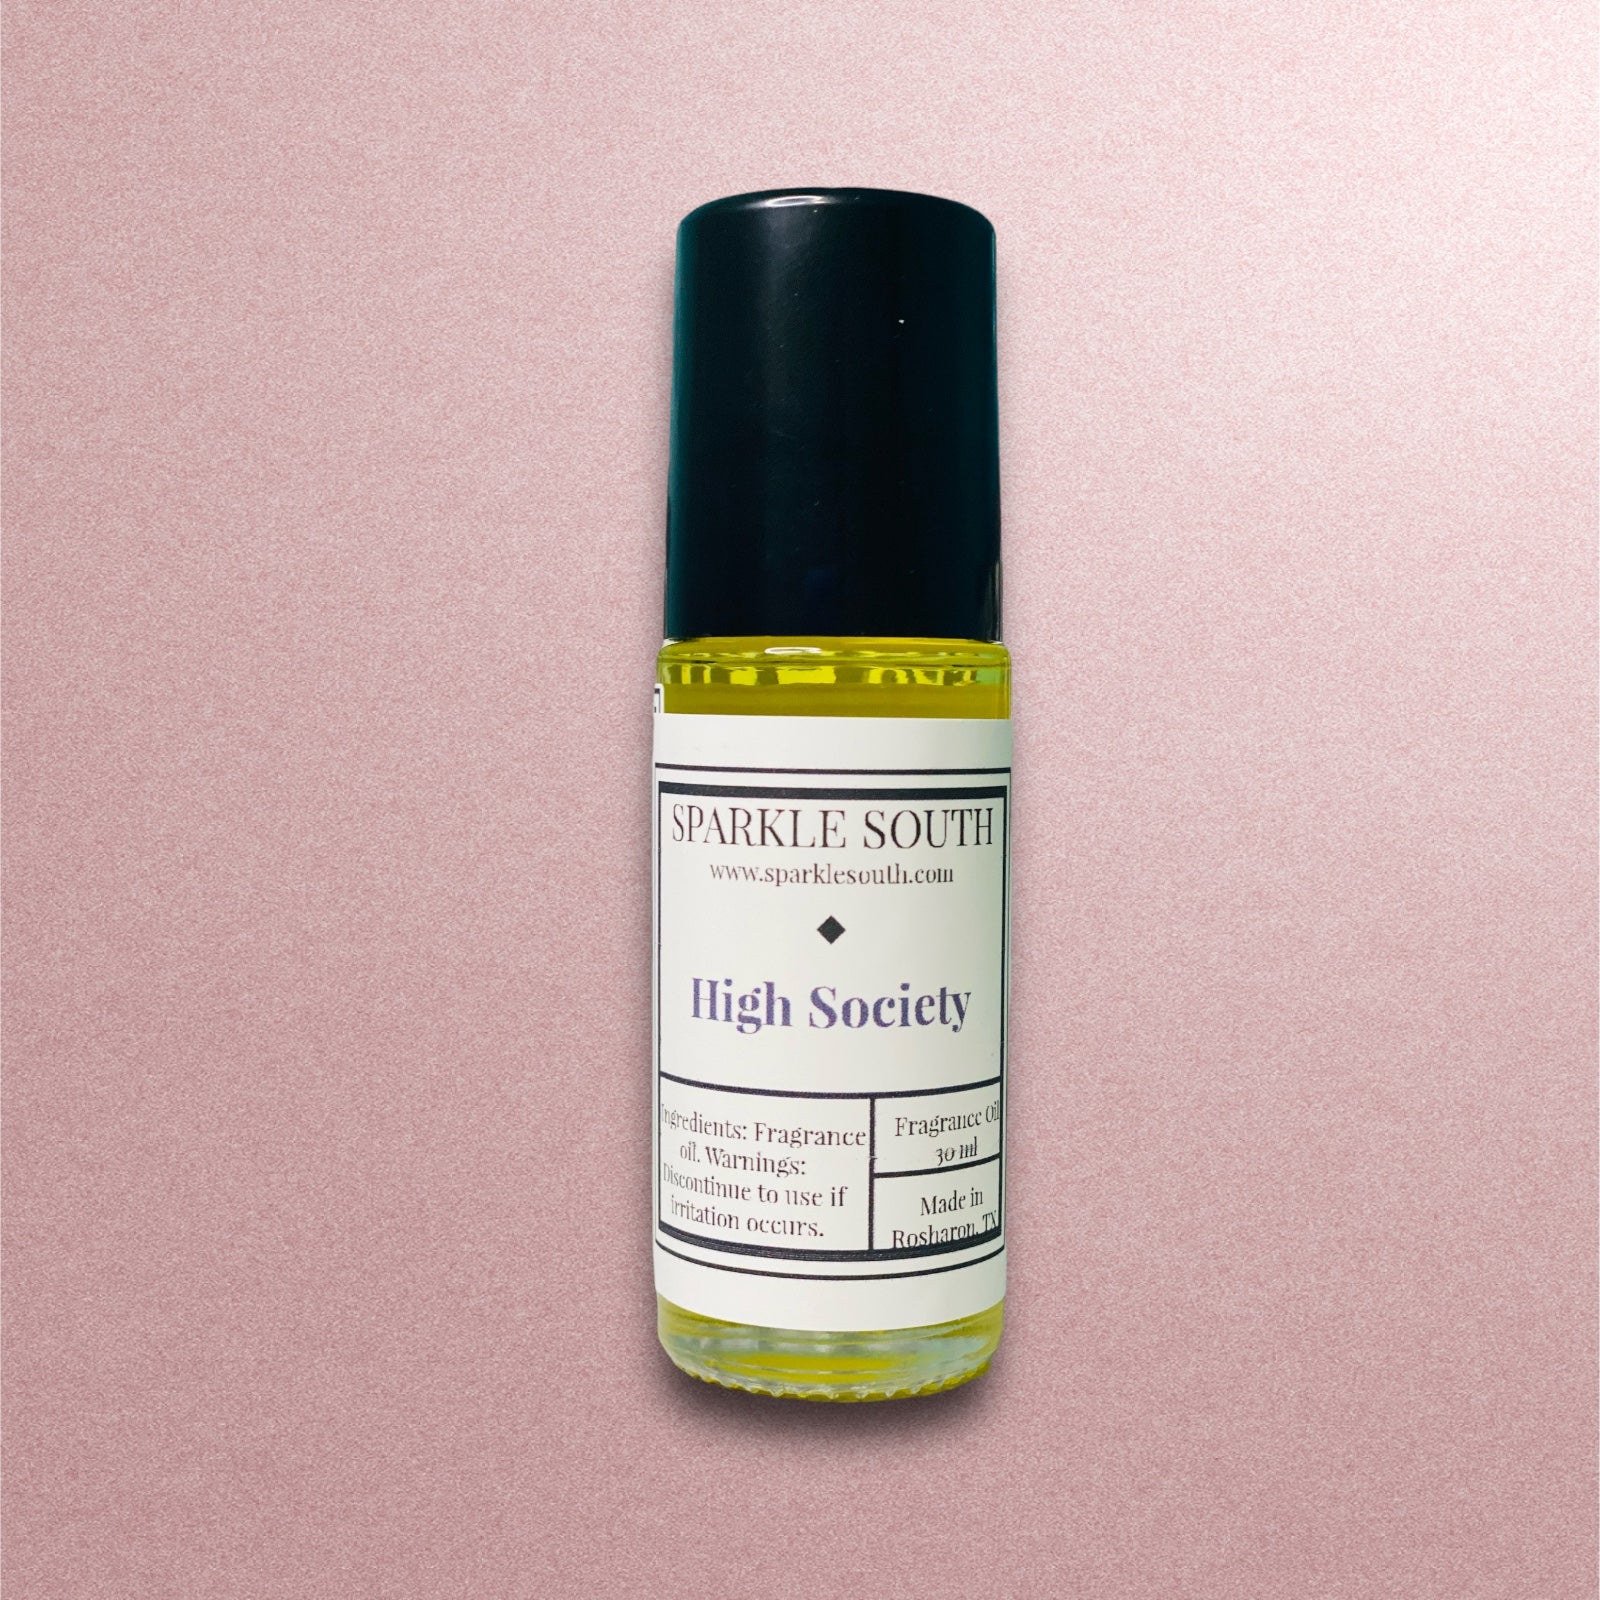 High Society inspired by Libre. 30 ml fragrance oil